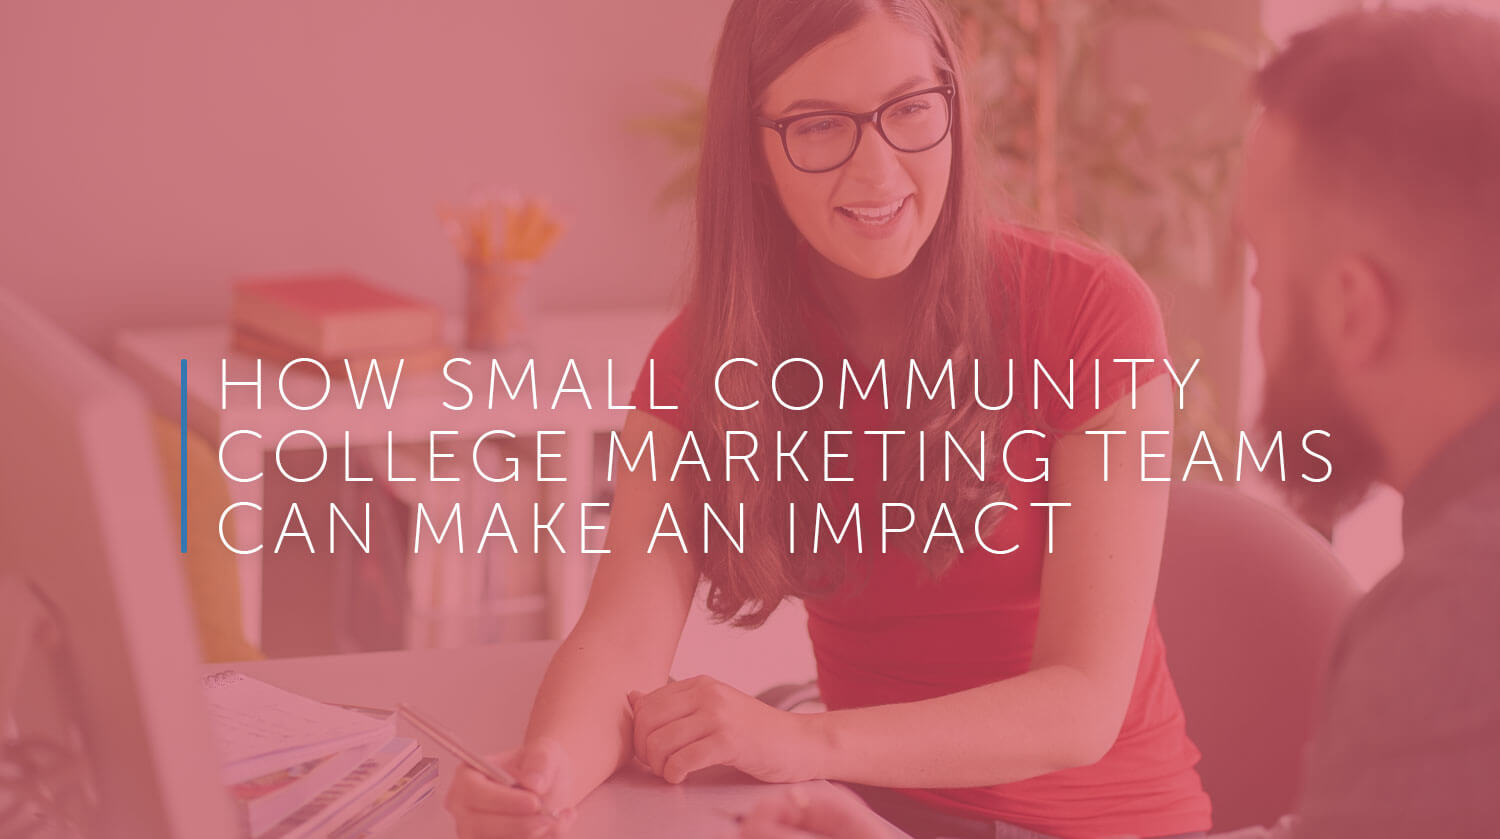 How Small Community College Marketing Teams Can Make an Impact